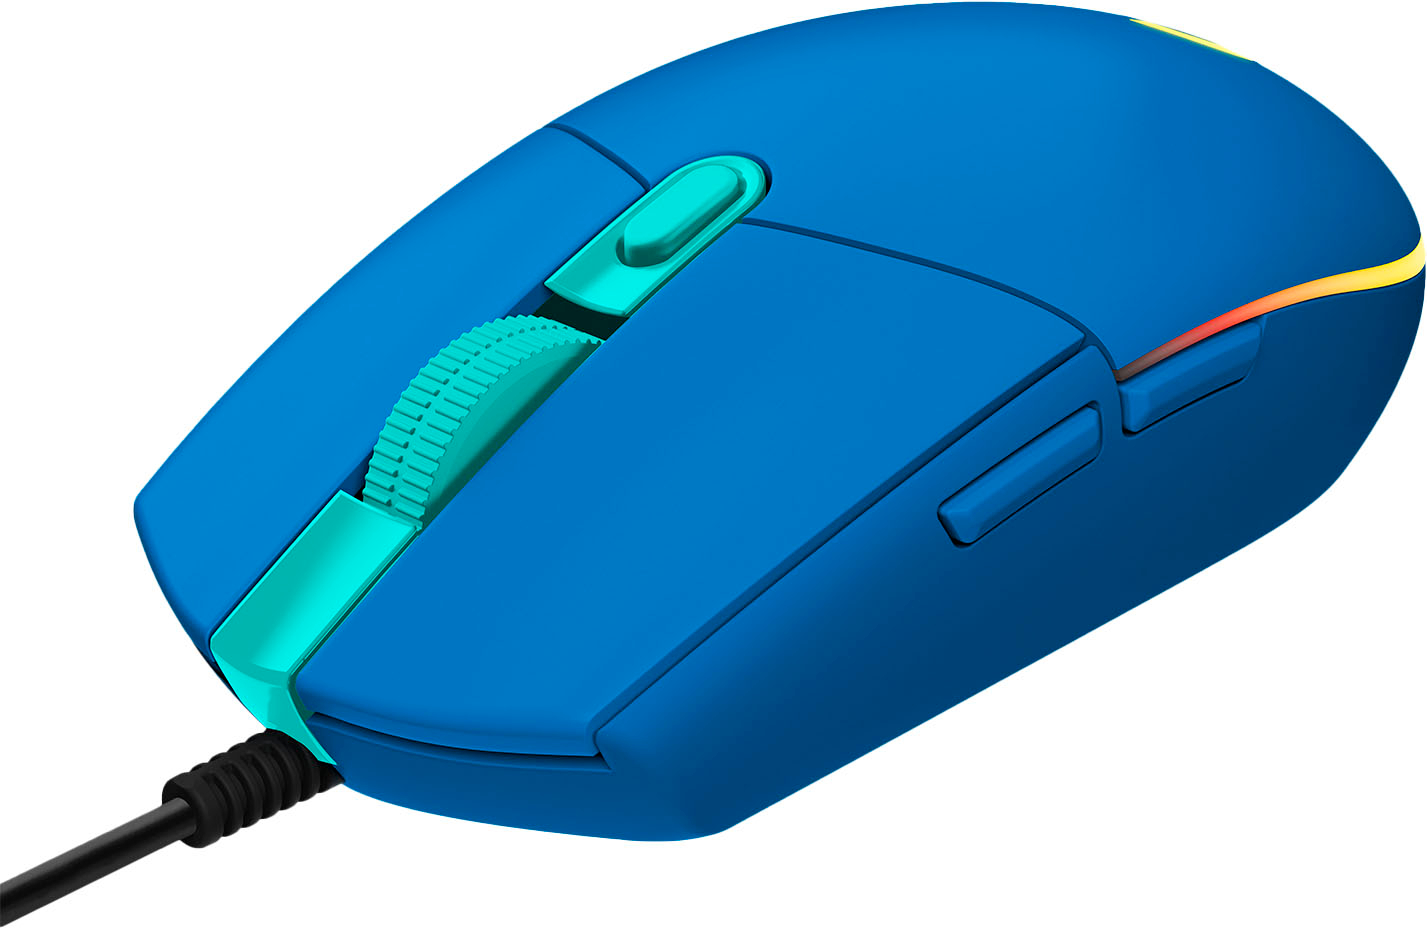 G203 DPI Best sensor with 910-005792 Mouse LIGHTSYNC Logitech - Gaming 8,000 Blue Buy Optical Wired